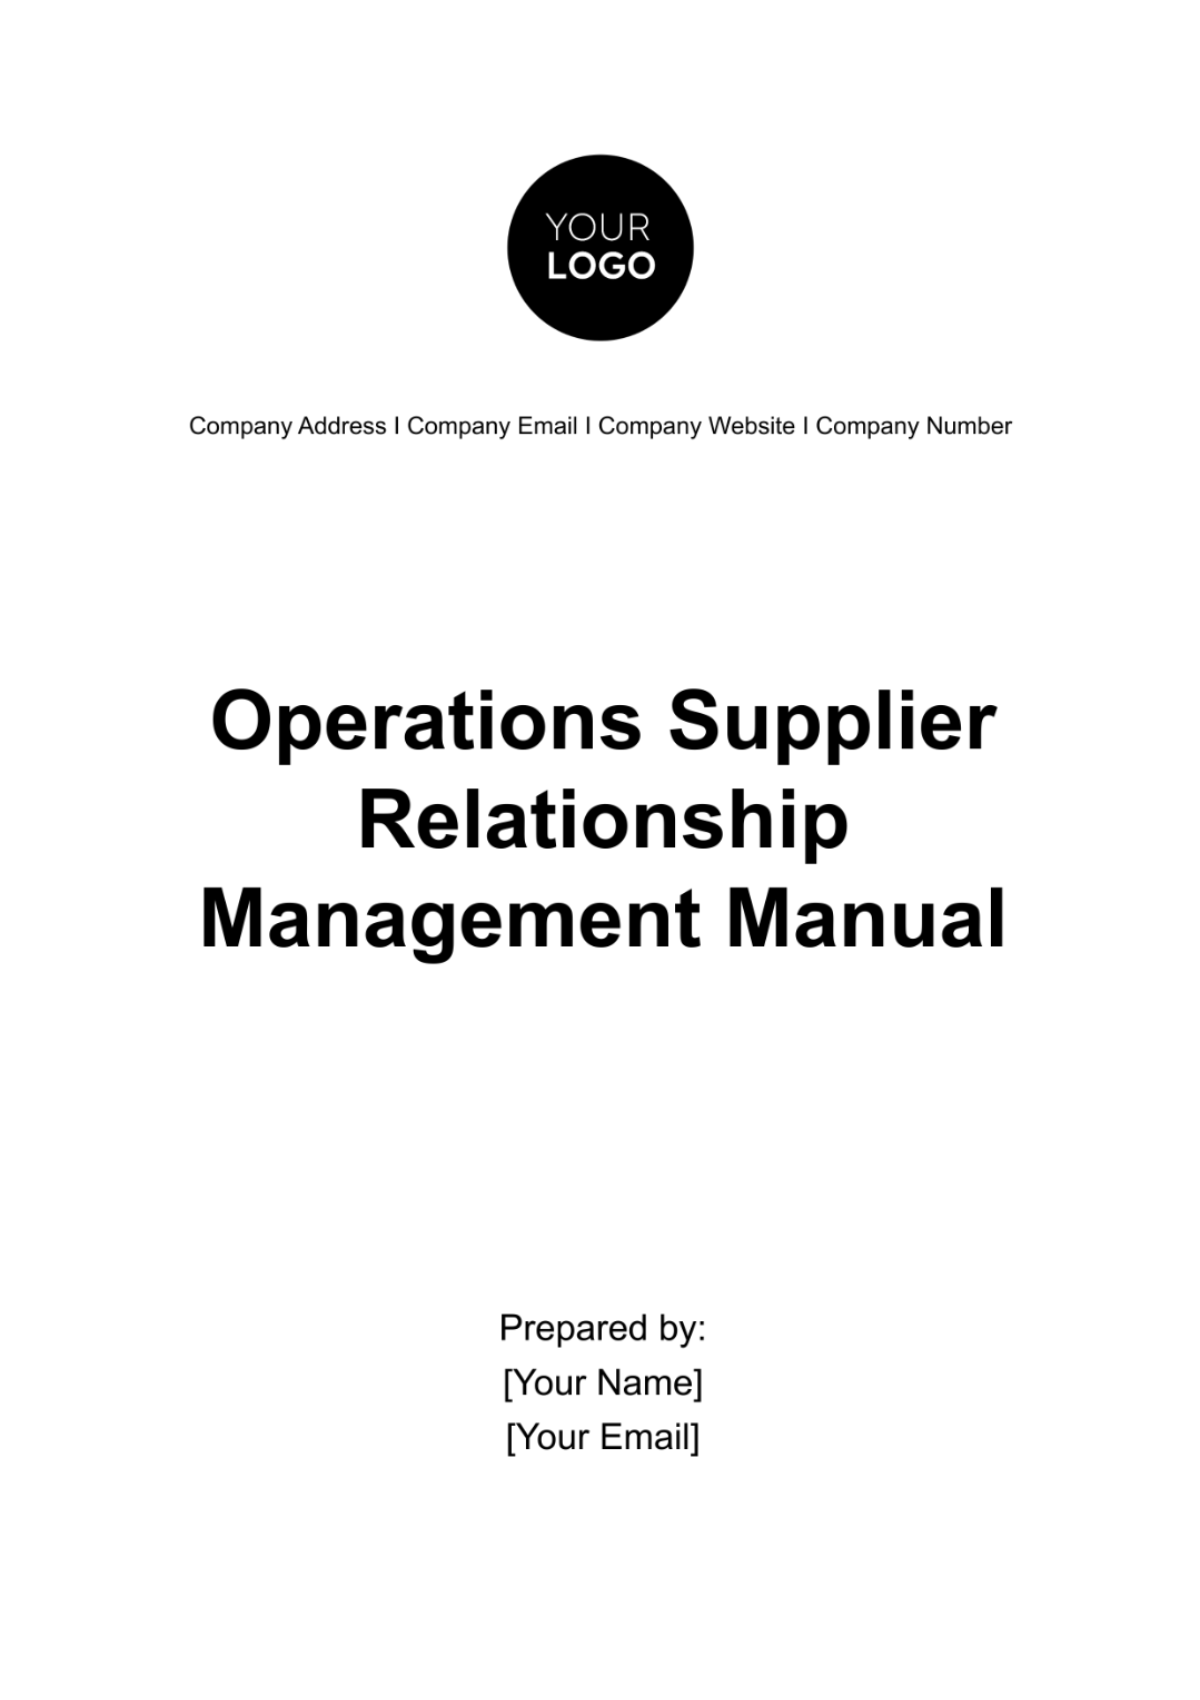 Operations Supplier Relationship Management Manual Template